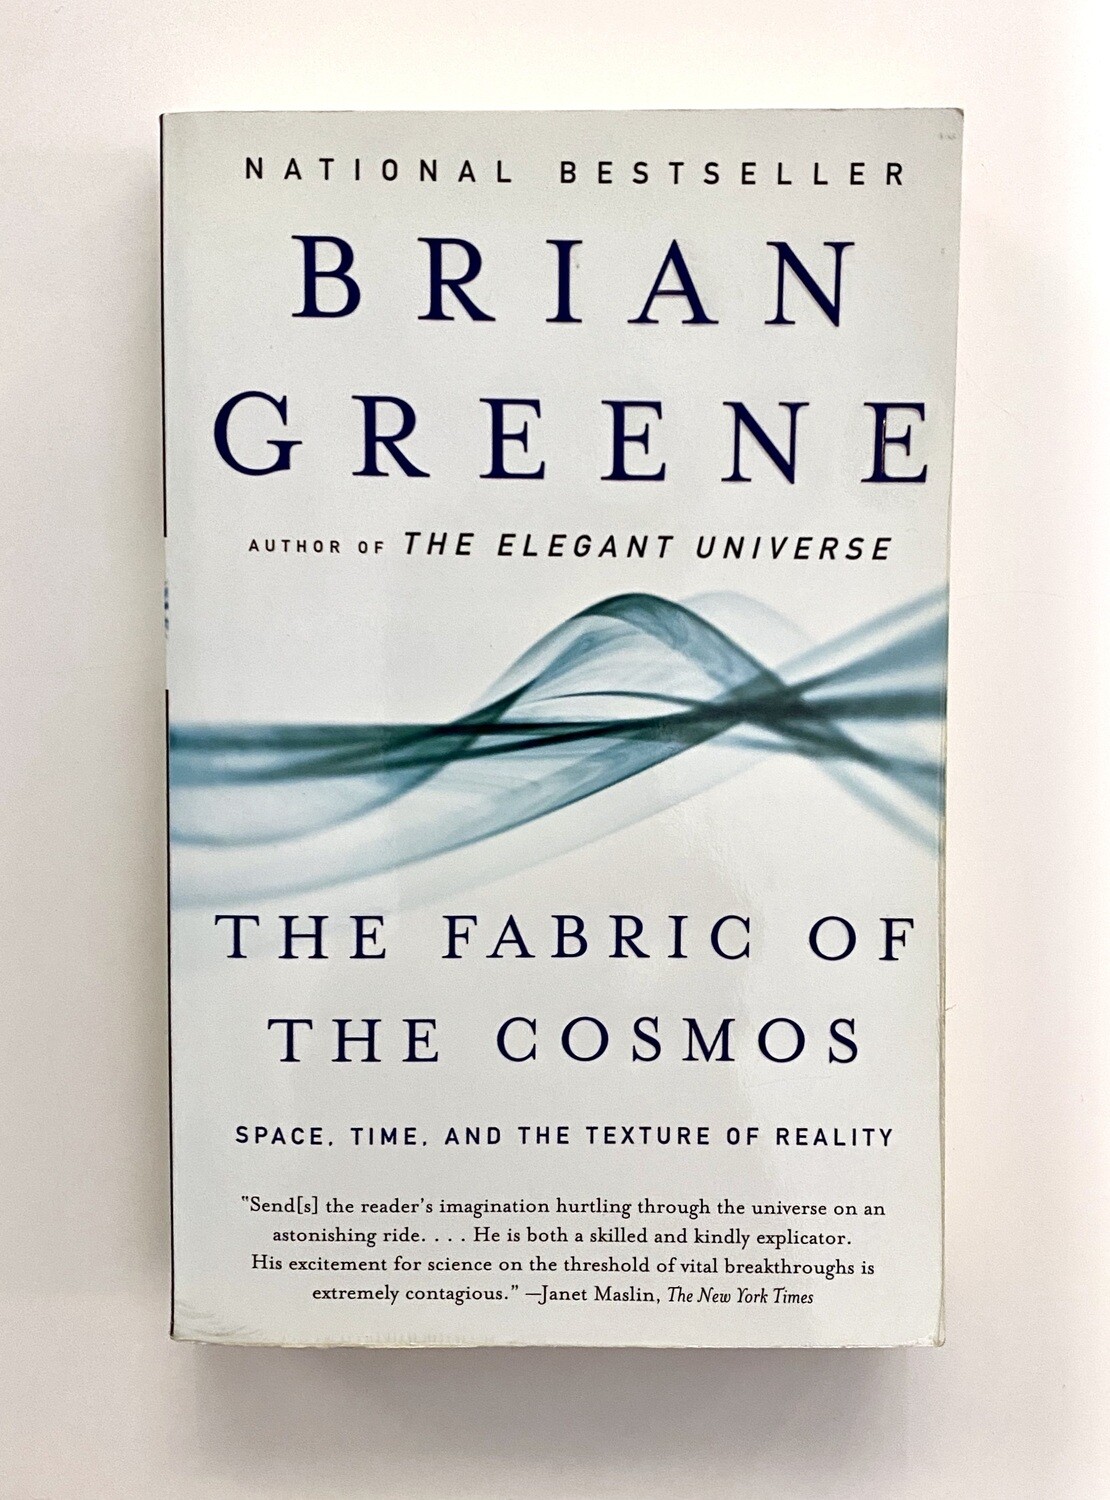 USED - The Fabric of The Cosmos, Greene, Brian